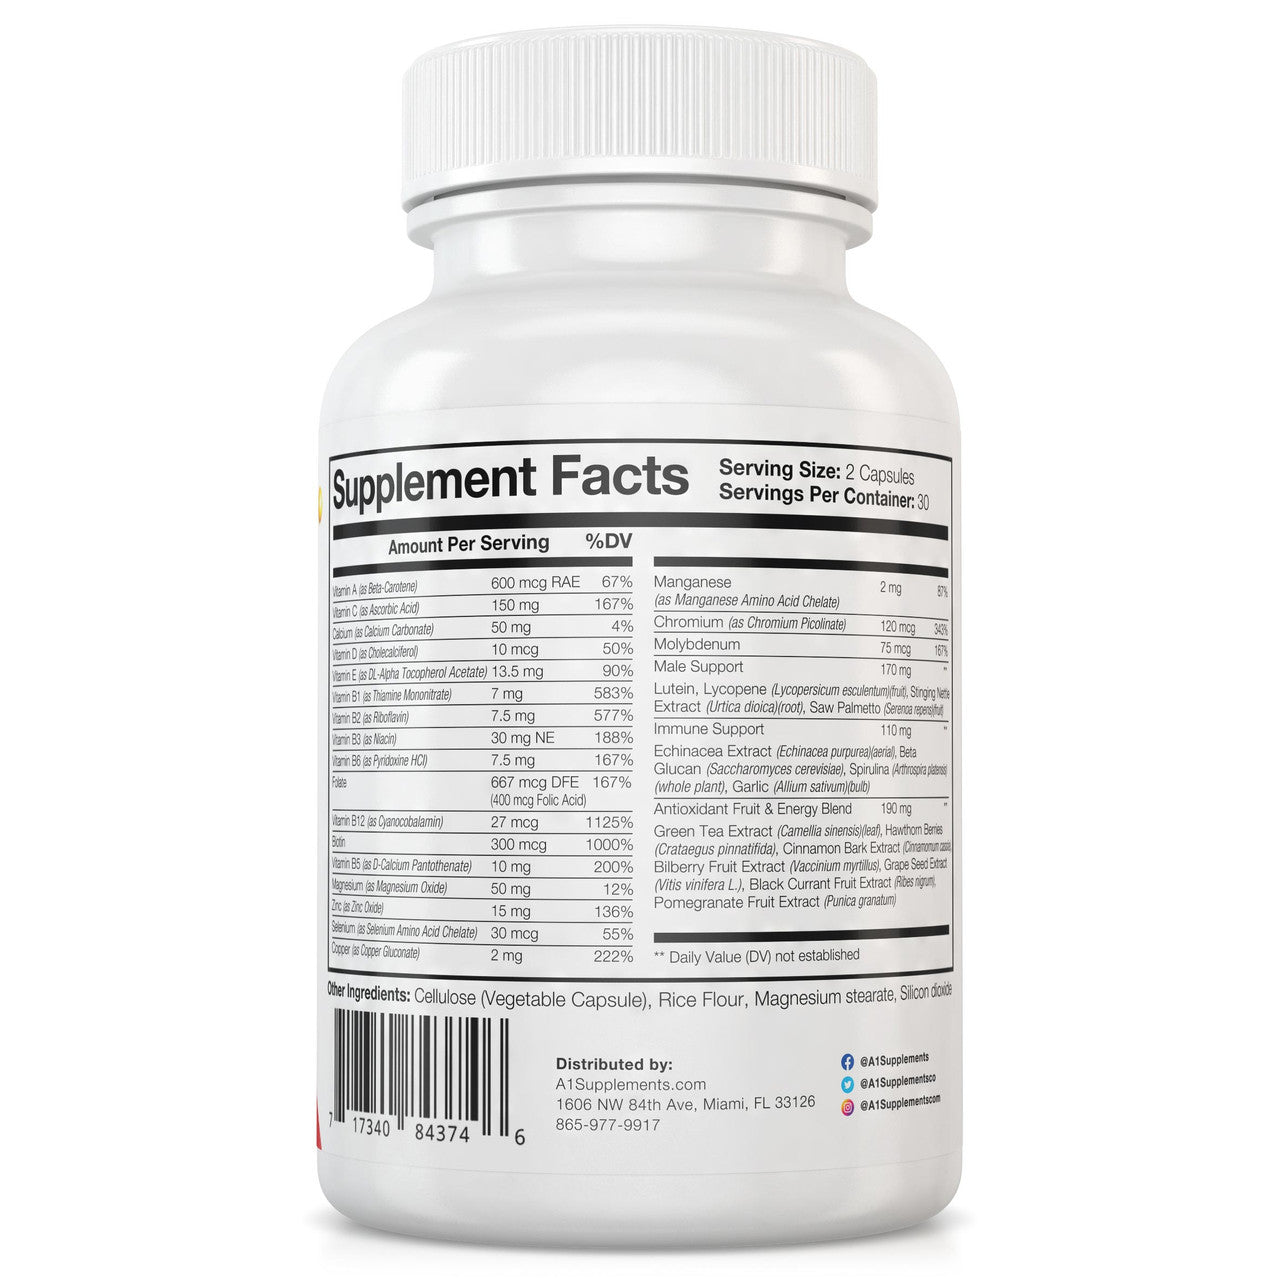 Ayone Nutrition Men’s Multivitamin Supplement Facts